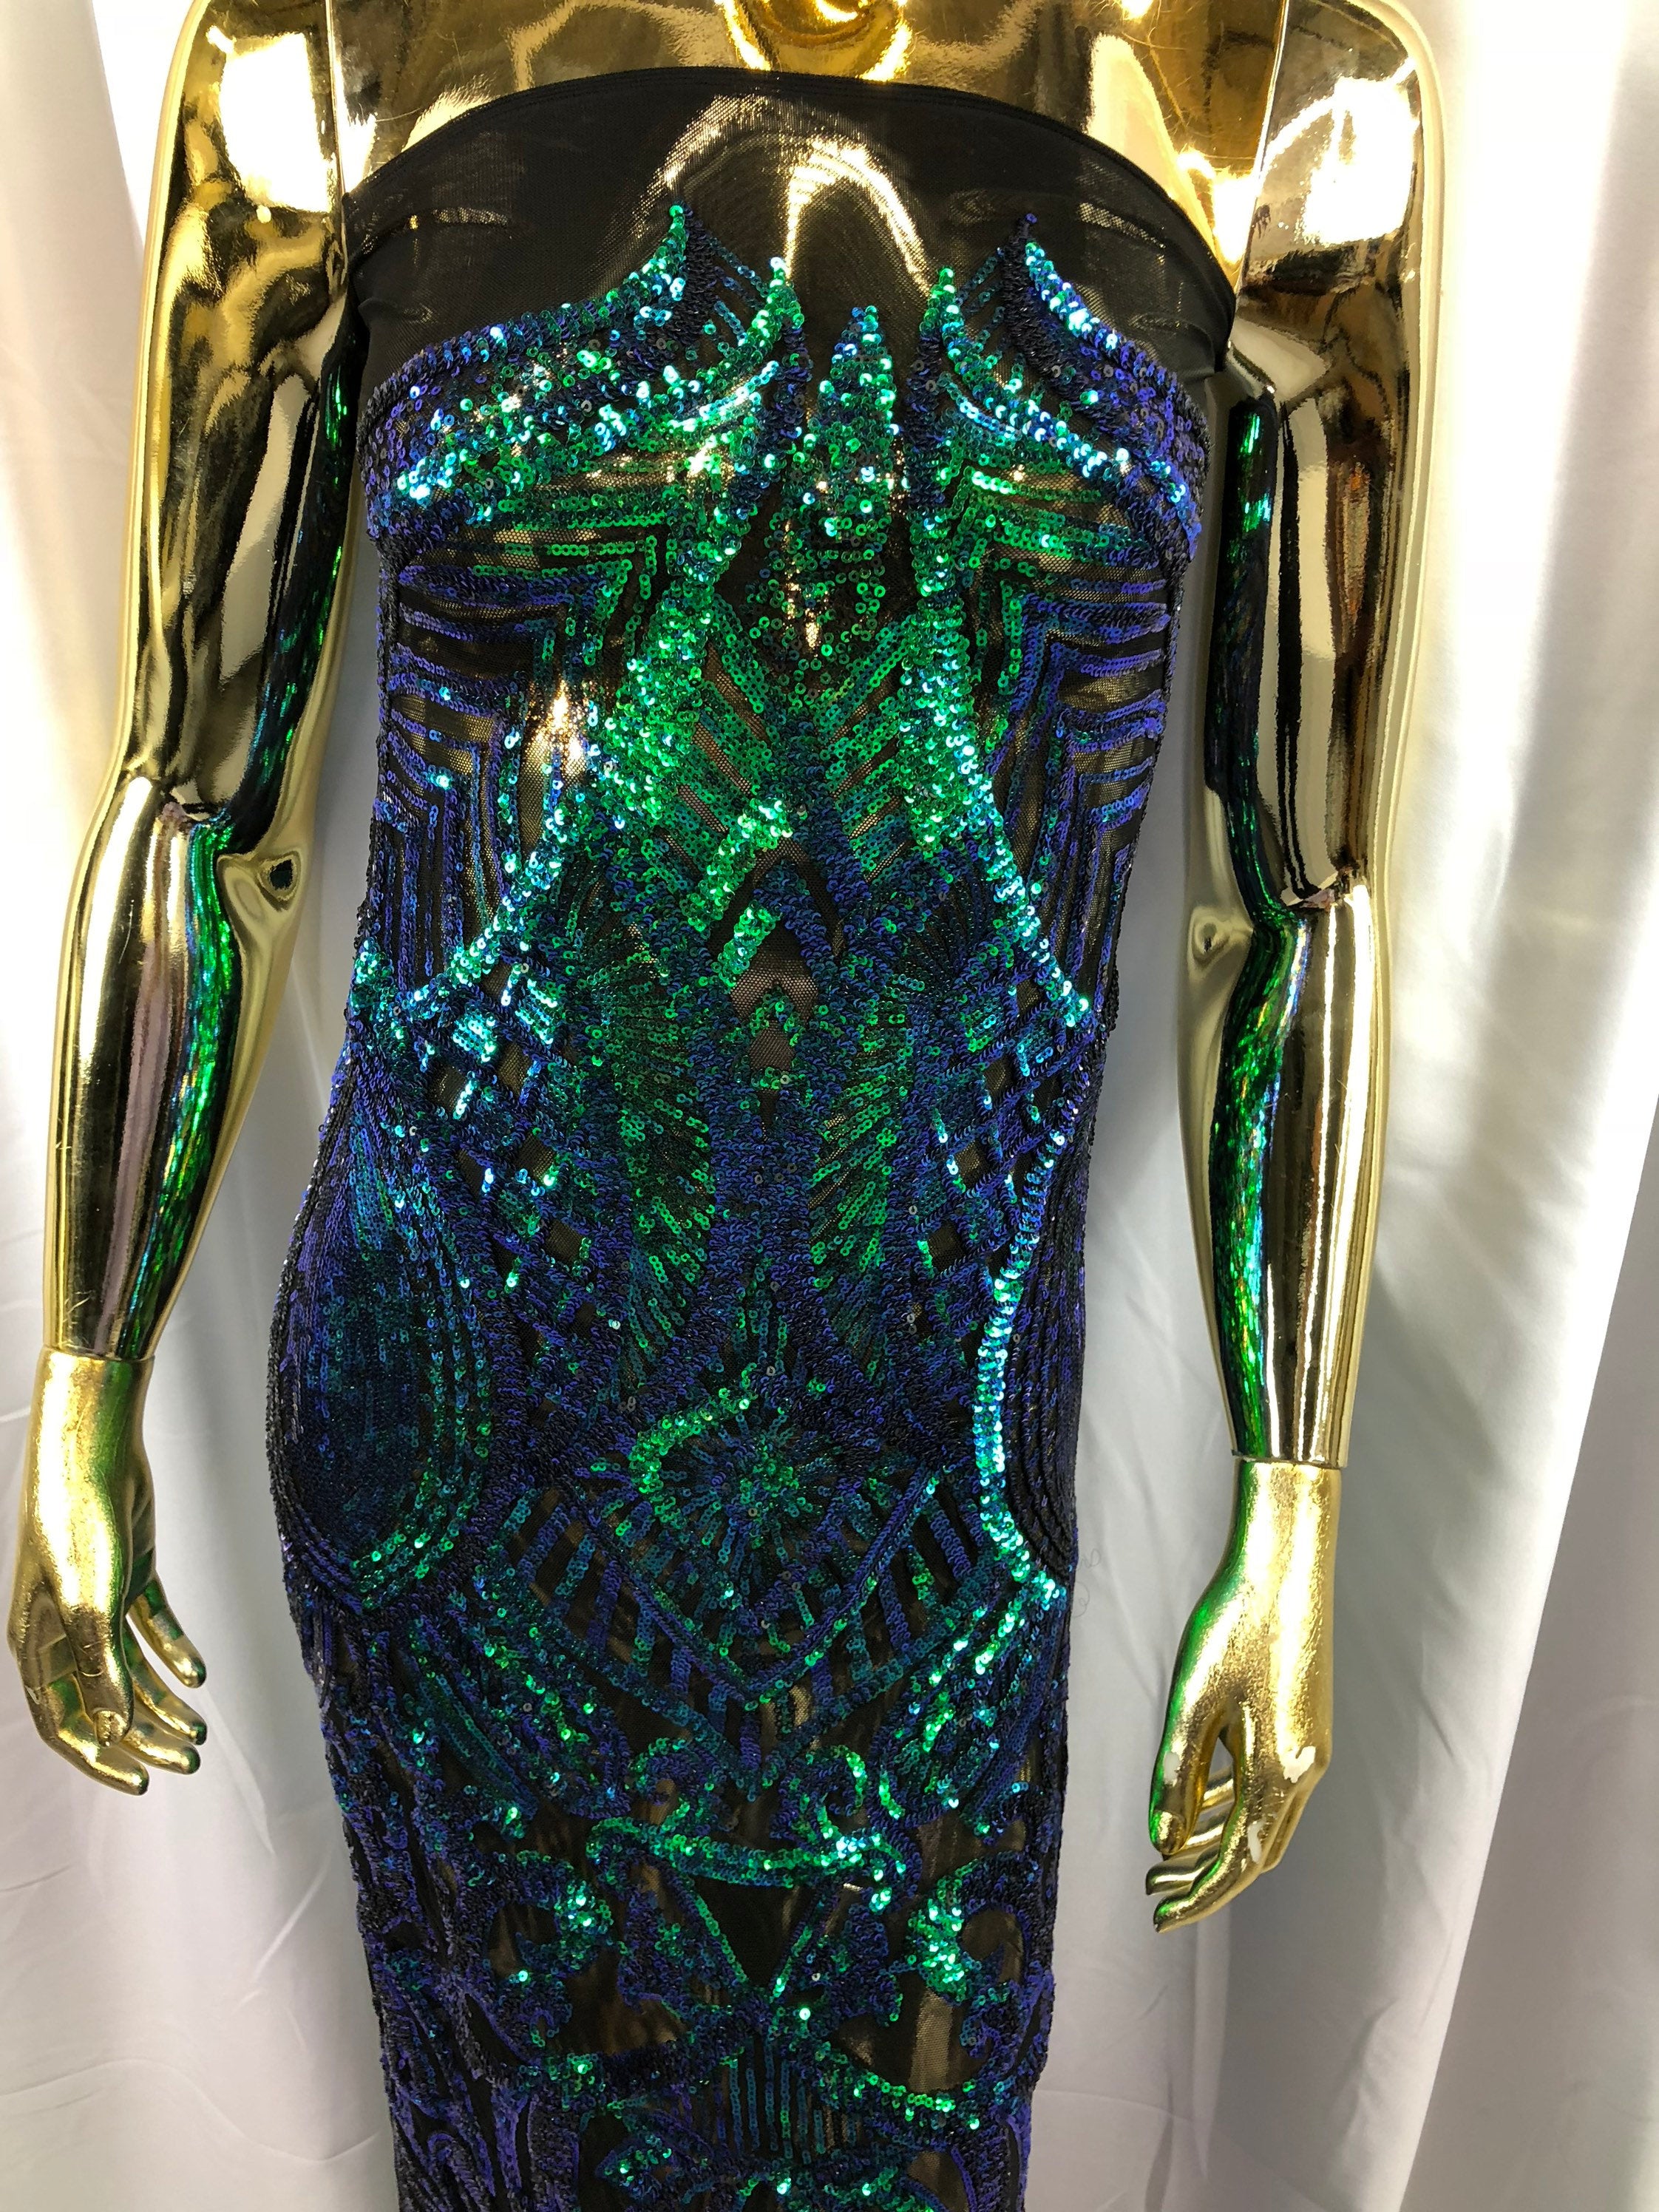 Iridescent Green Sequin Fabric, Royalty Design Embroidered With Sequin